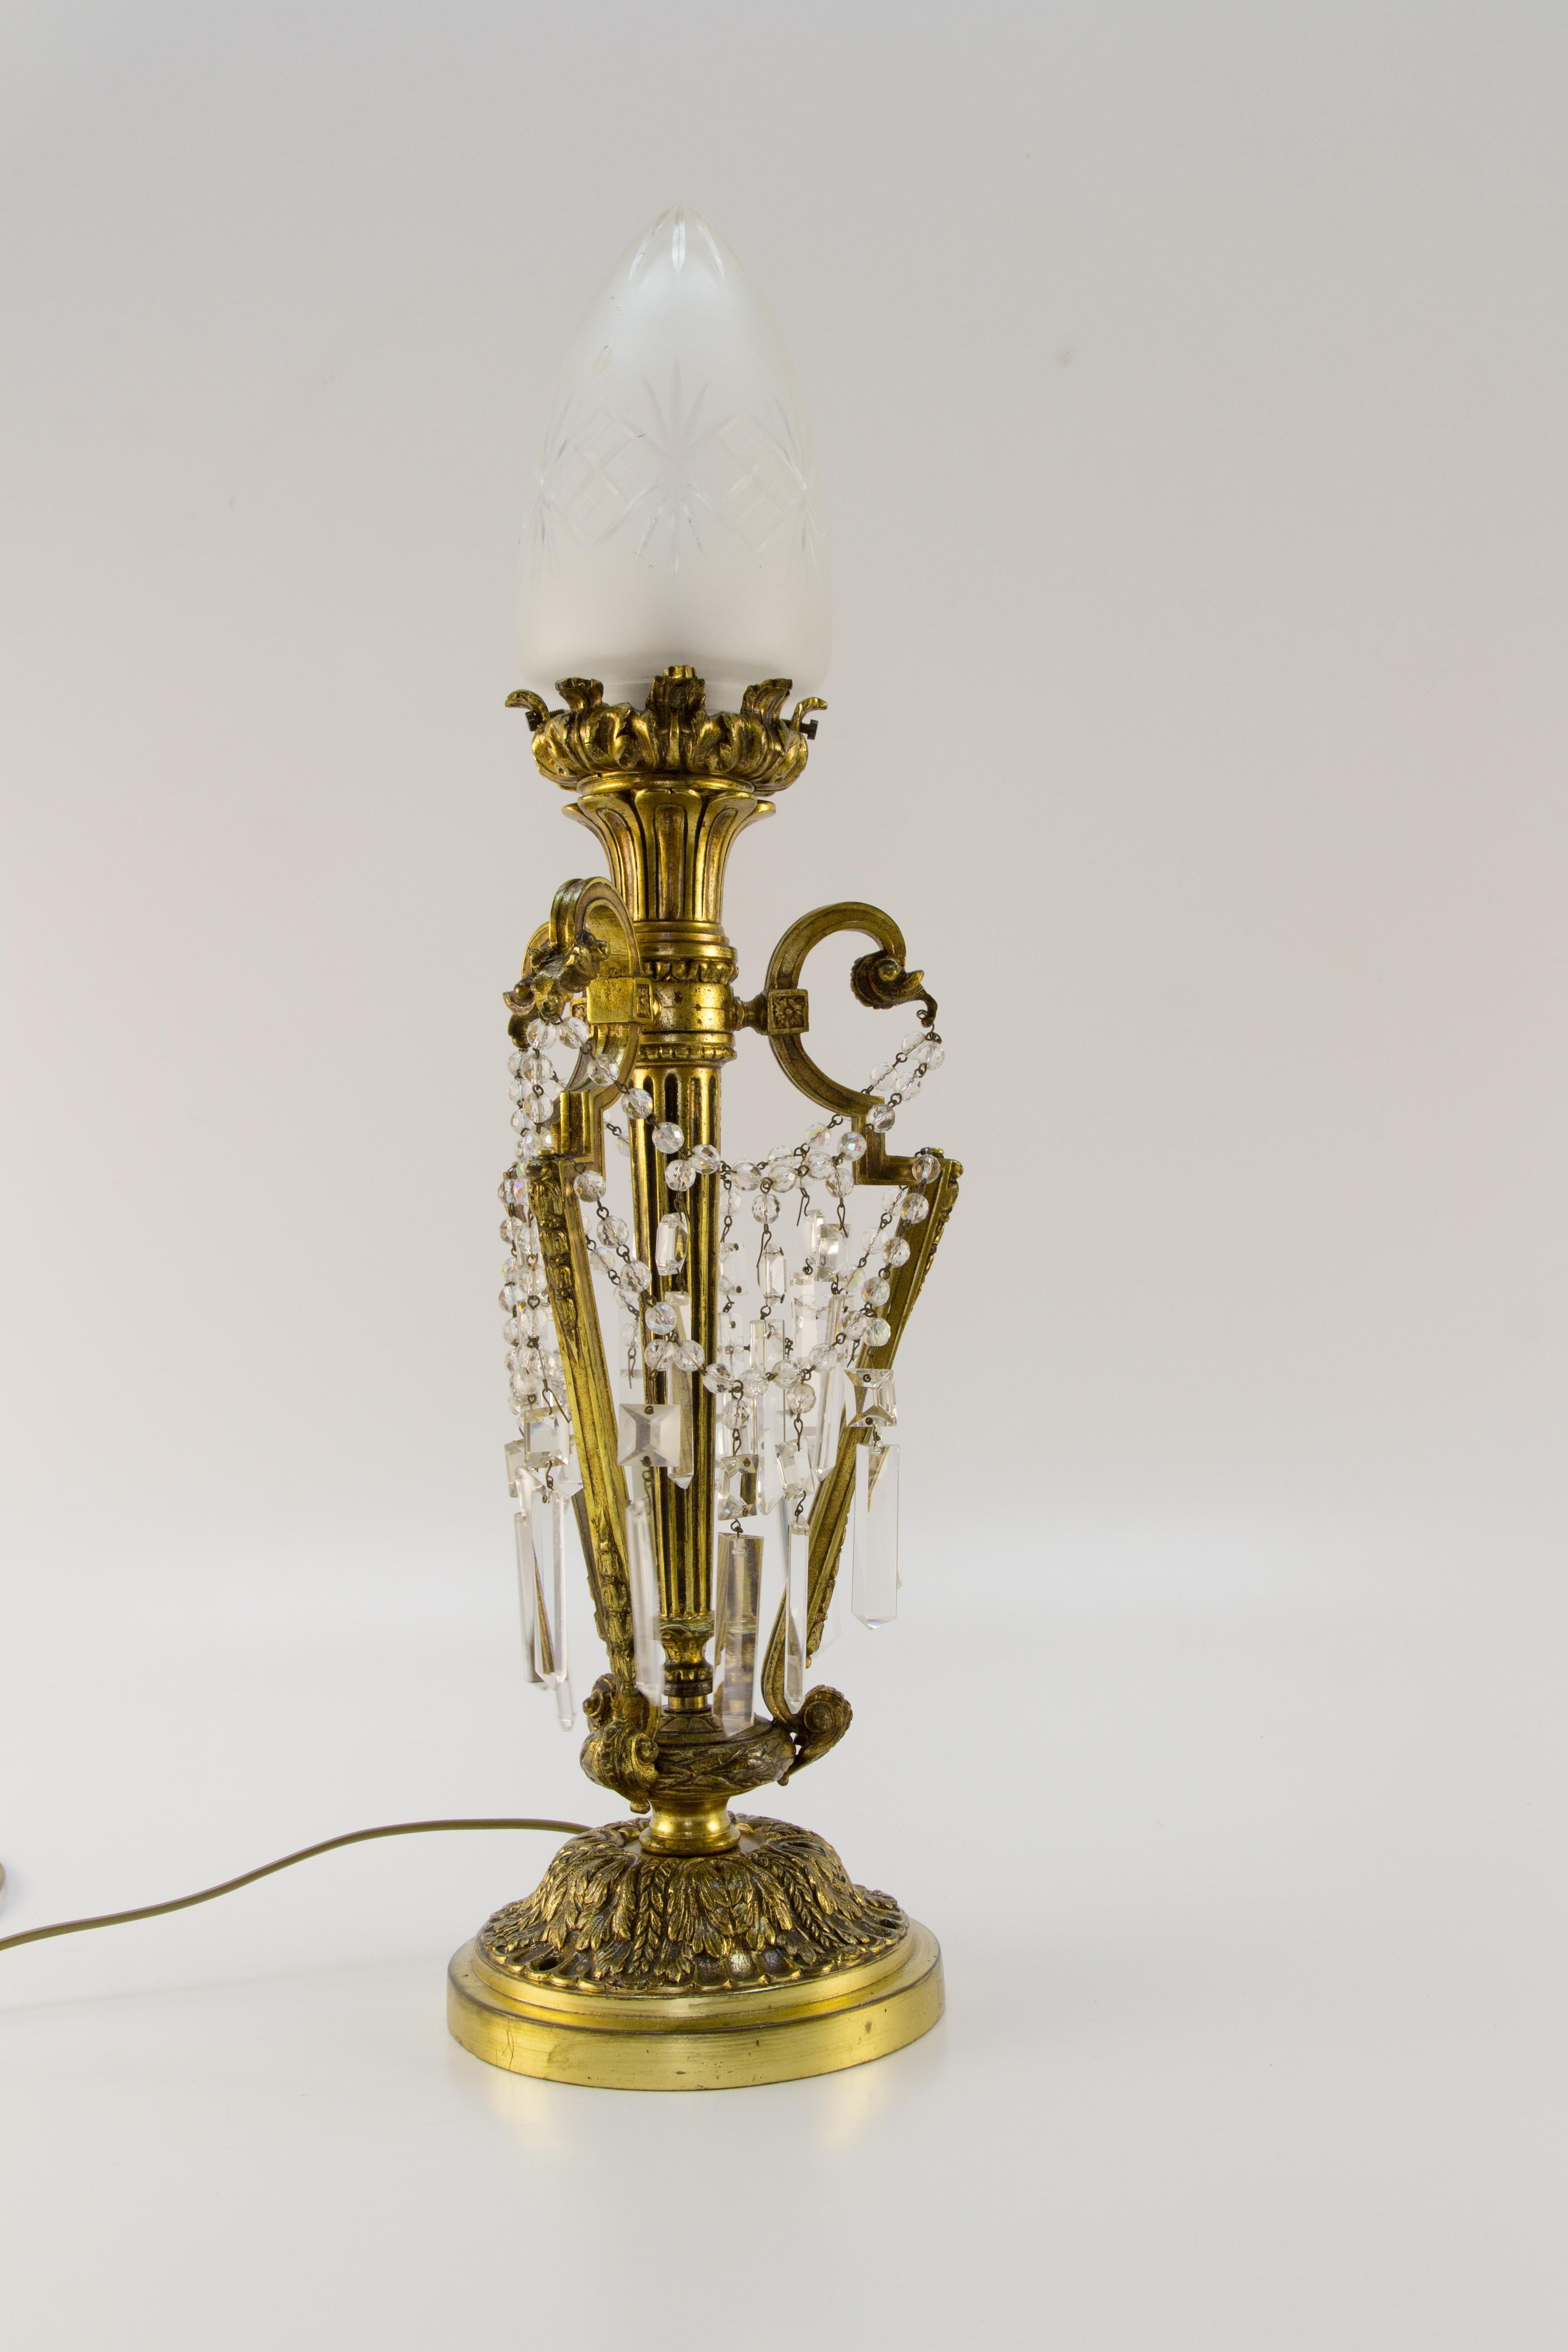 French Louis XVI style bronze and crystal newel post lamp with frosted glass shade and original E 27 socket with new wiring. France, 1920’s.
Nicely decorated with bronze decors in a form of acanthus leaves and crystal glass beaded chains and